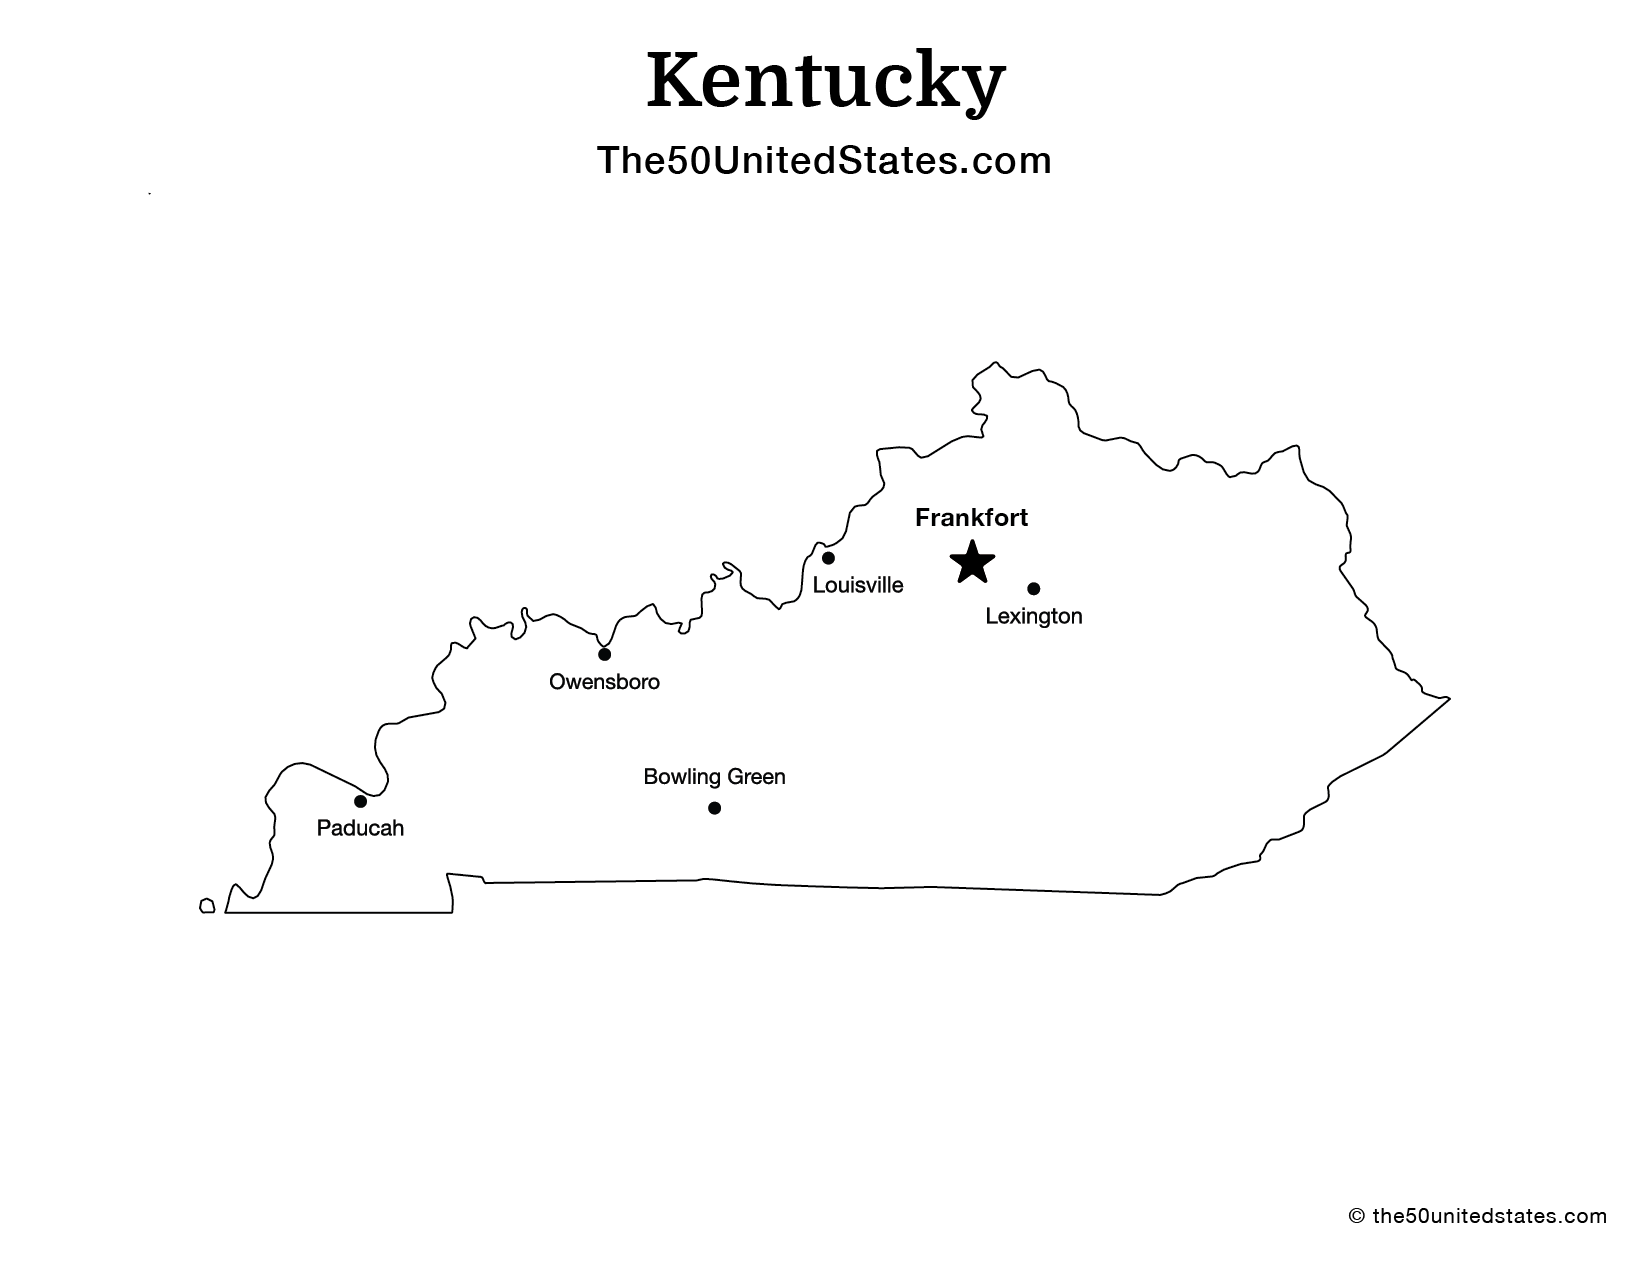 Map of Kentucky with Cities (Labeled)